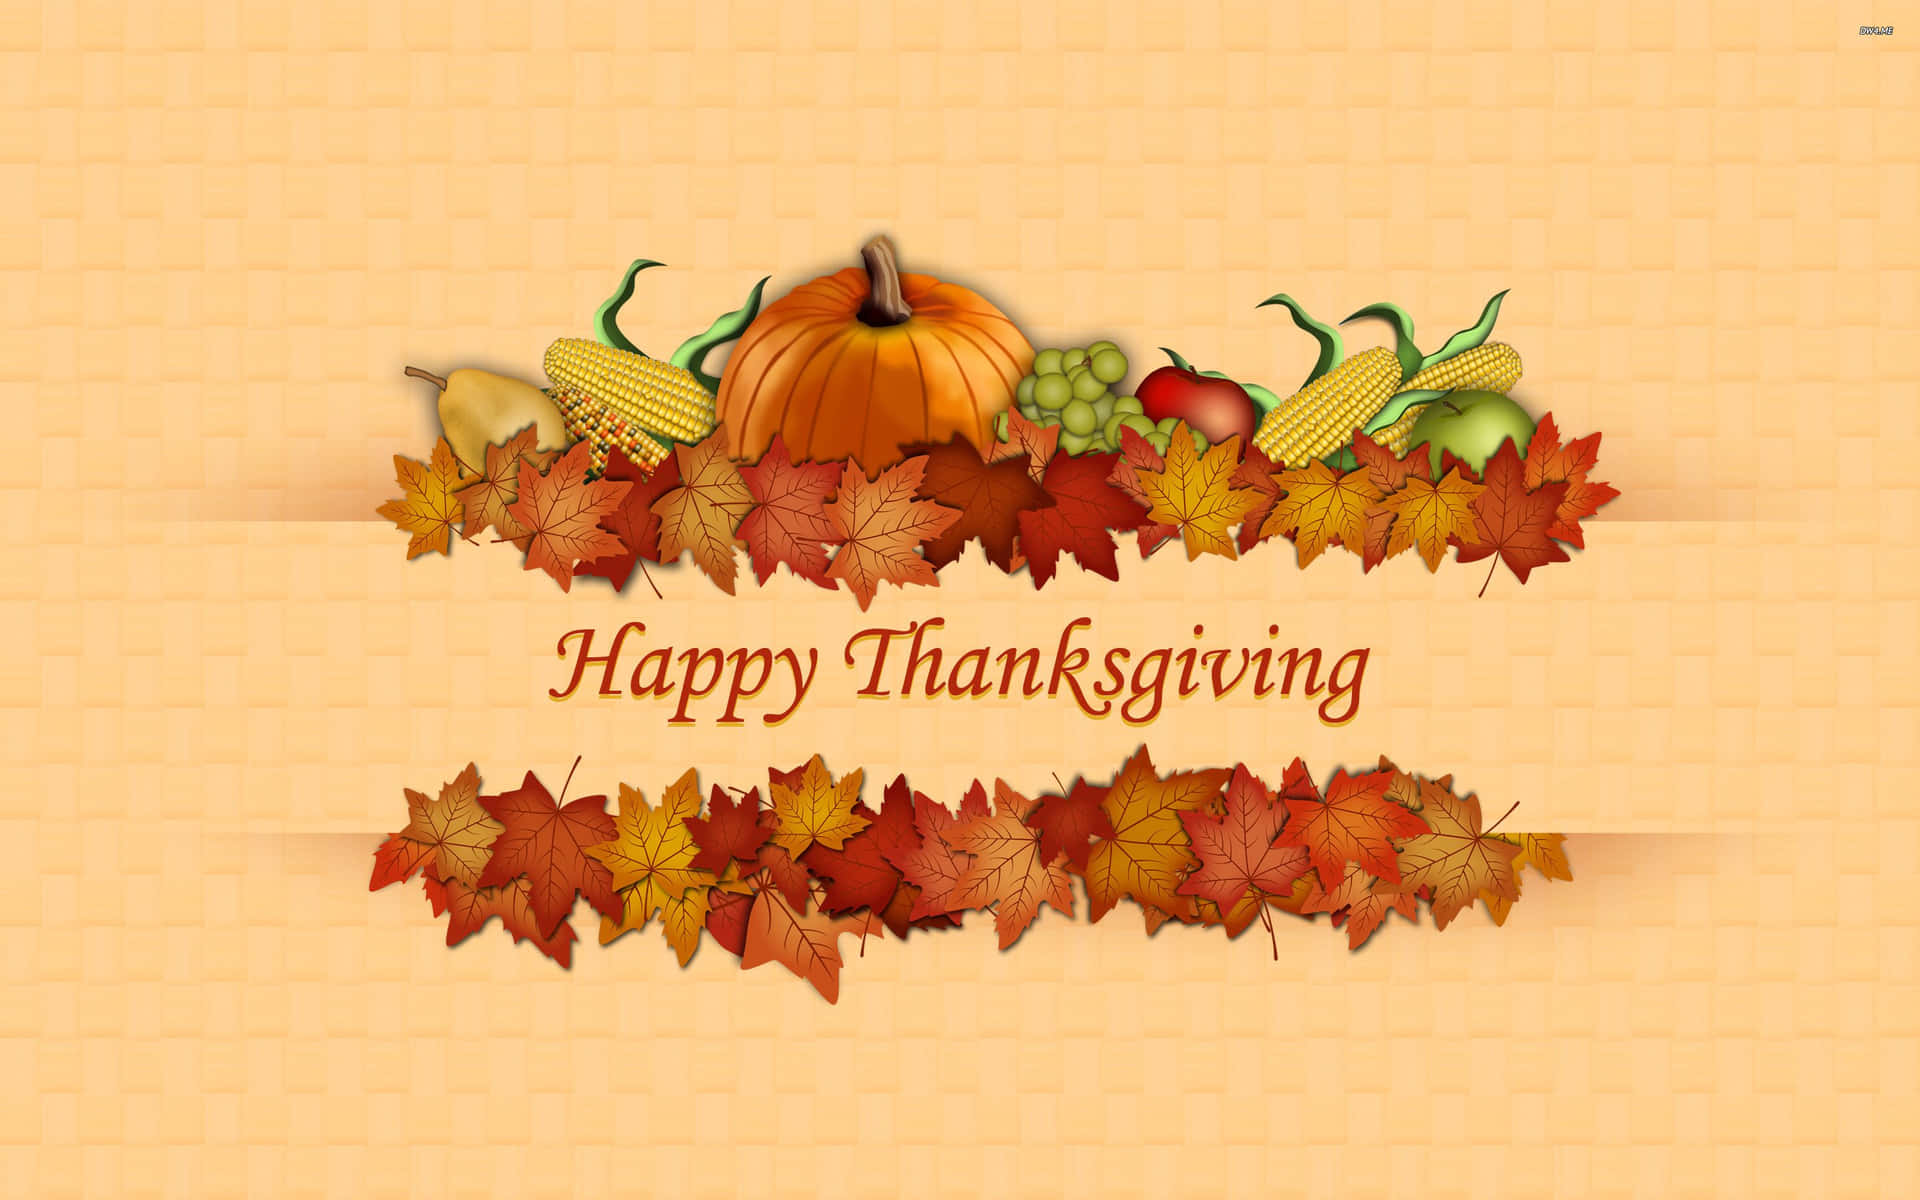 Caption: "warm And Cozy Happy Thanksgiving Background"